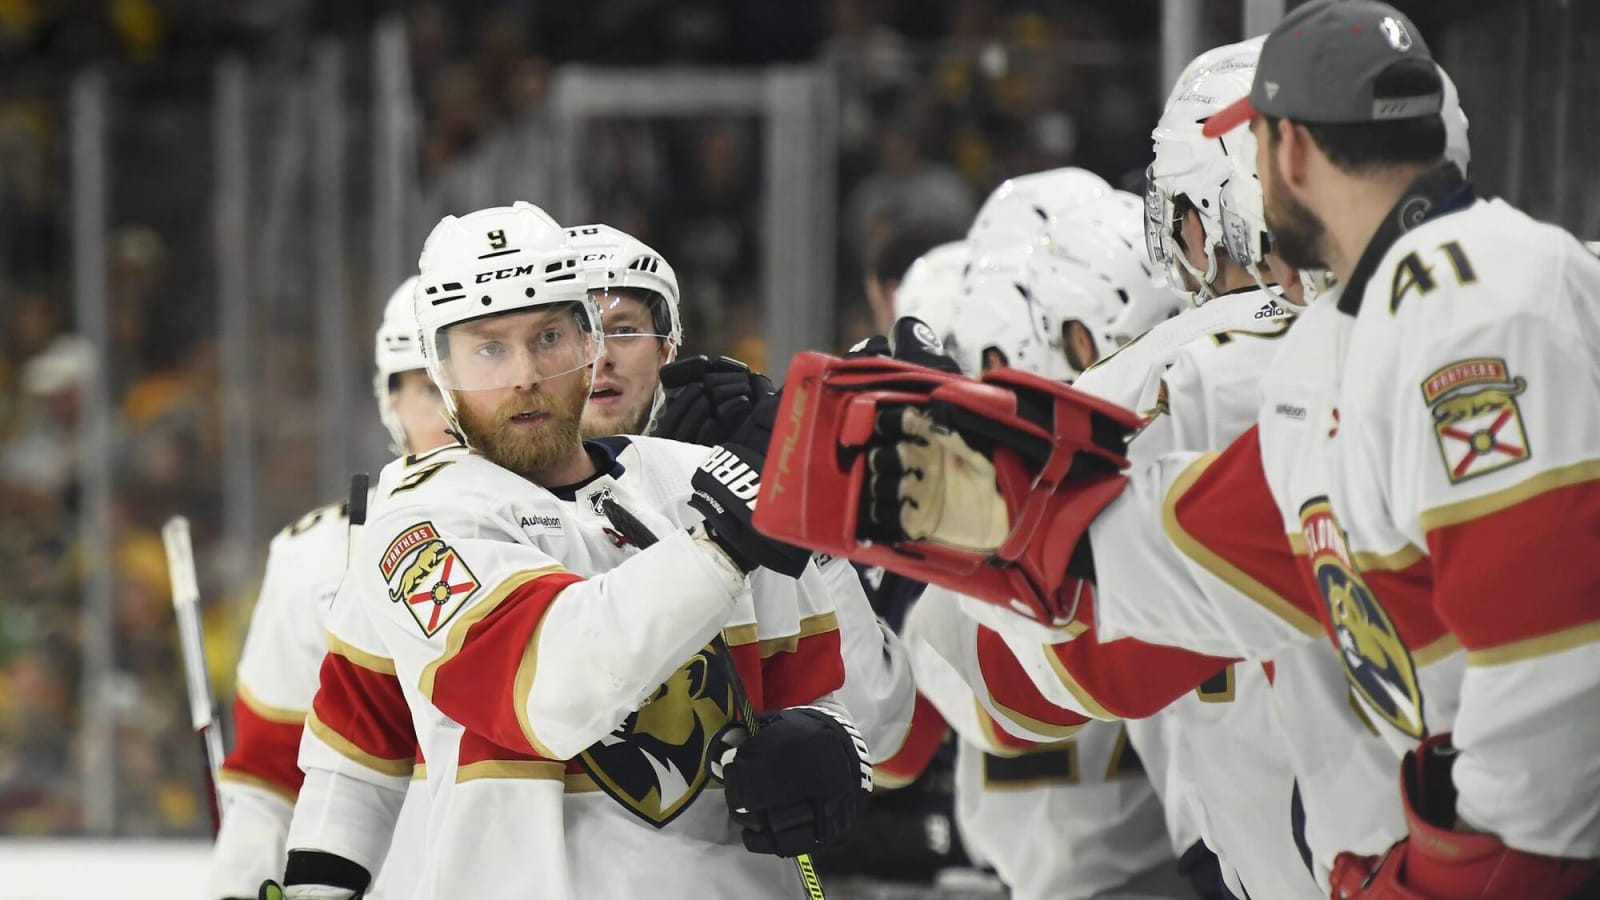 Stanley Cup Playoffs Day 23: Bennett causes more controversy as Panthers rally to take 3-1 series lead